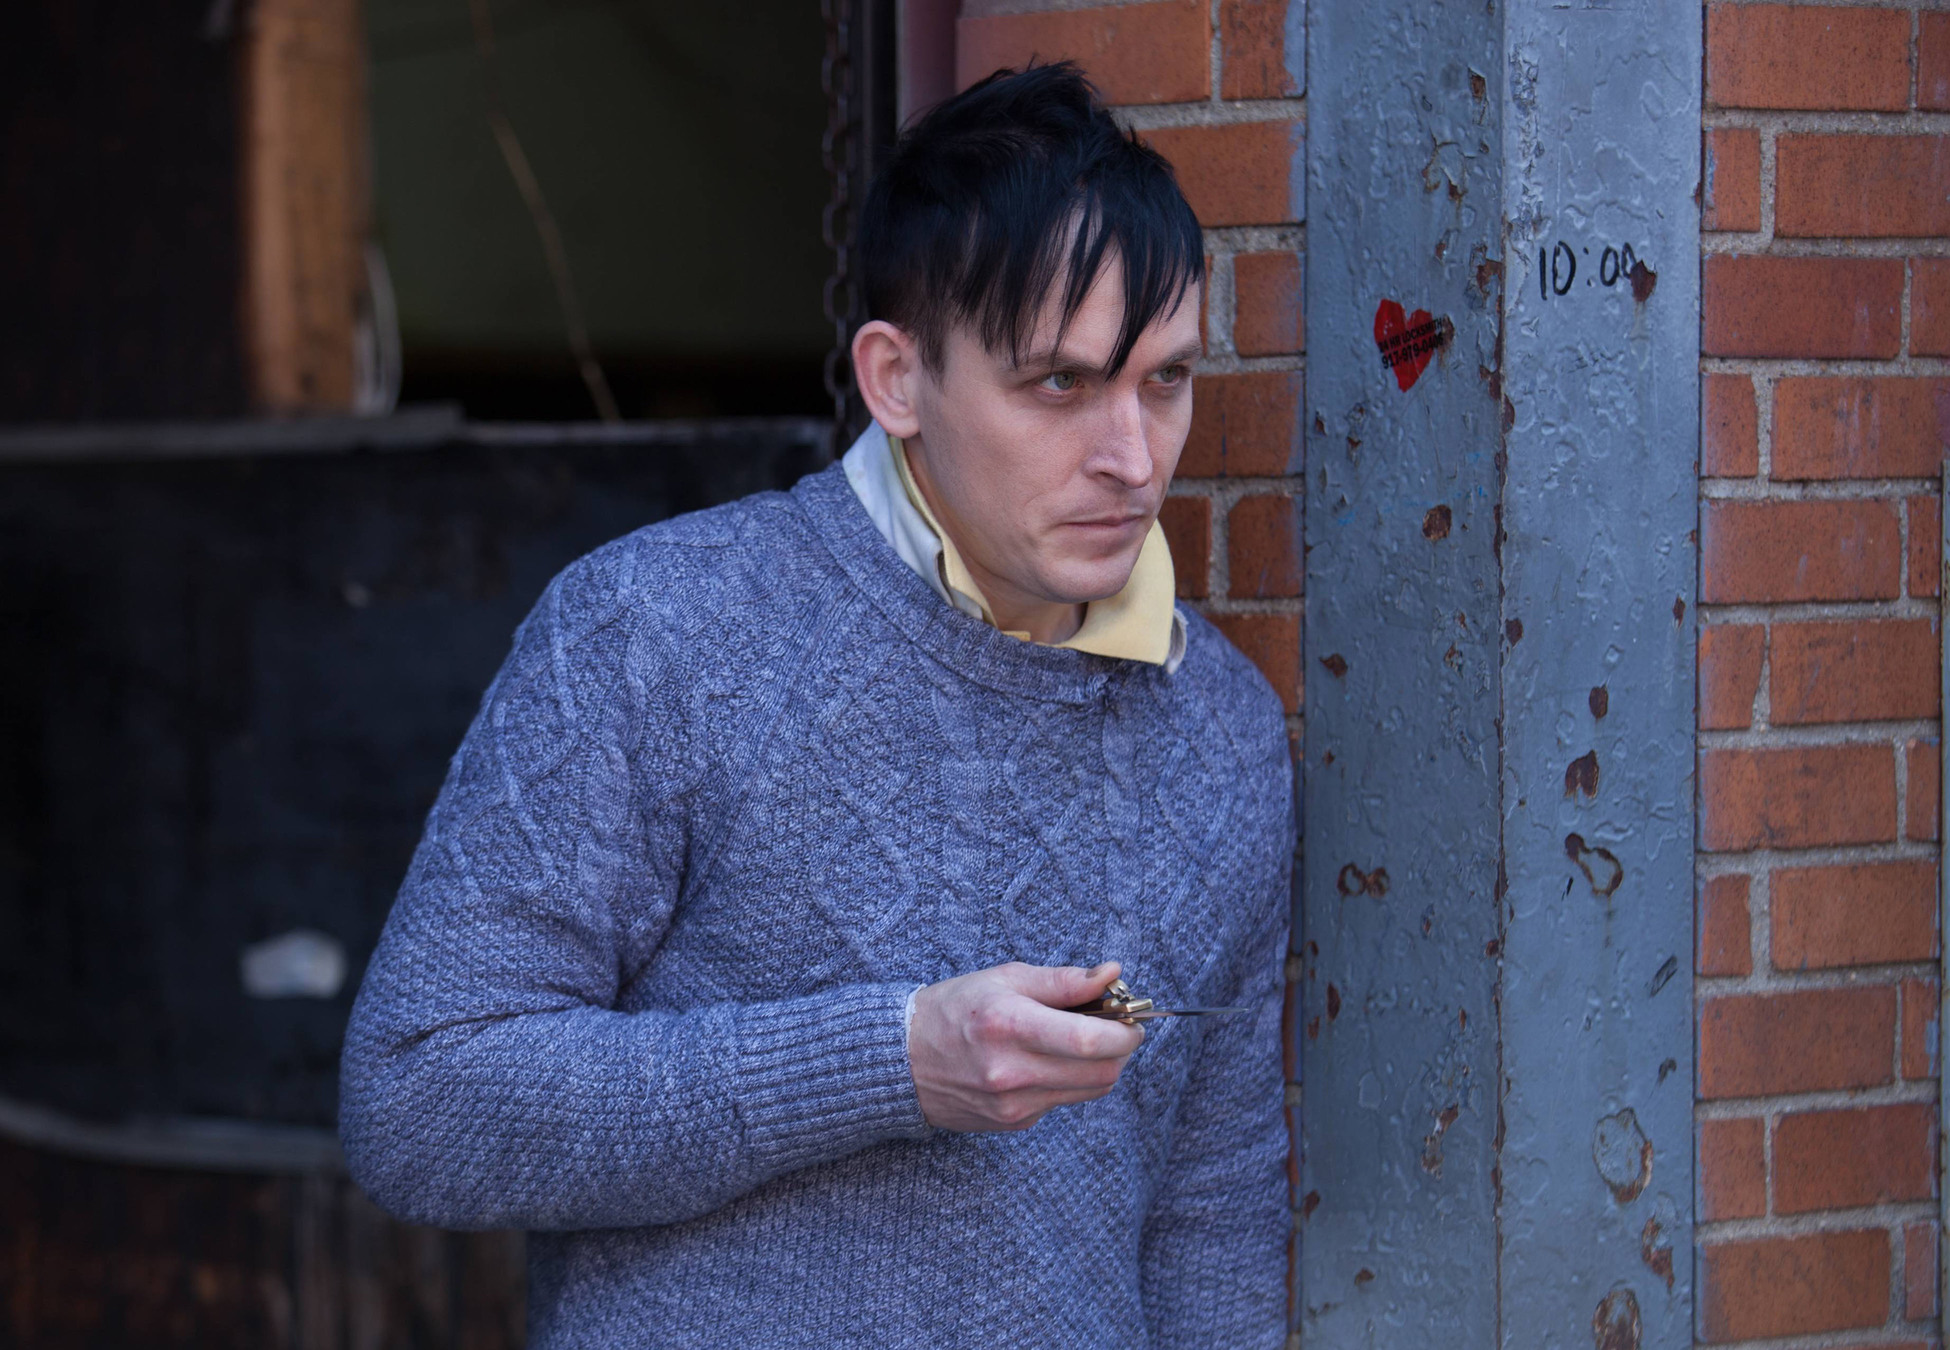 GOTHAM: Oswald Cobblepot (Robin Lord Taylor) returns to Gotham in the "The Balloonman" episode of GOTHAM airing Monday, Oct. 6 (8:00-9:00 PM ET/PT) on FOX. Â©2014 Fox Broadcasting Co. Cr: Jessica Miglio/FOX